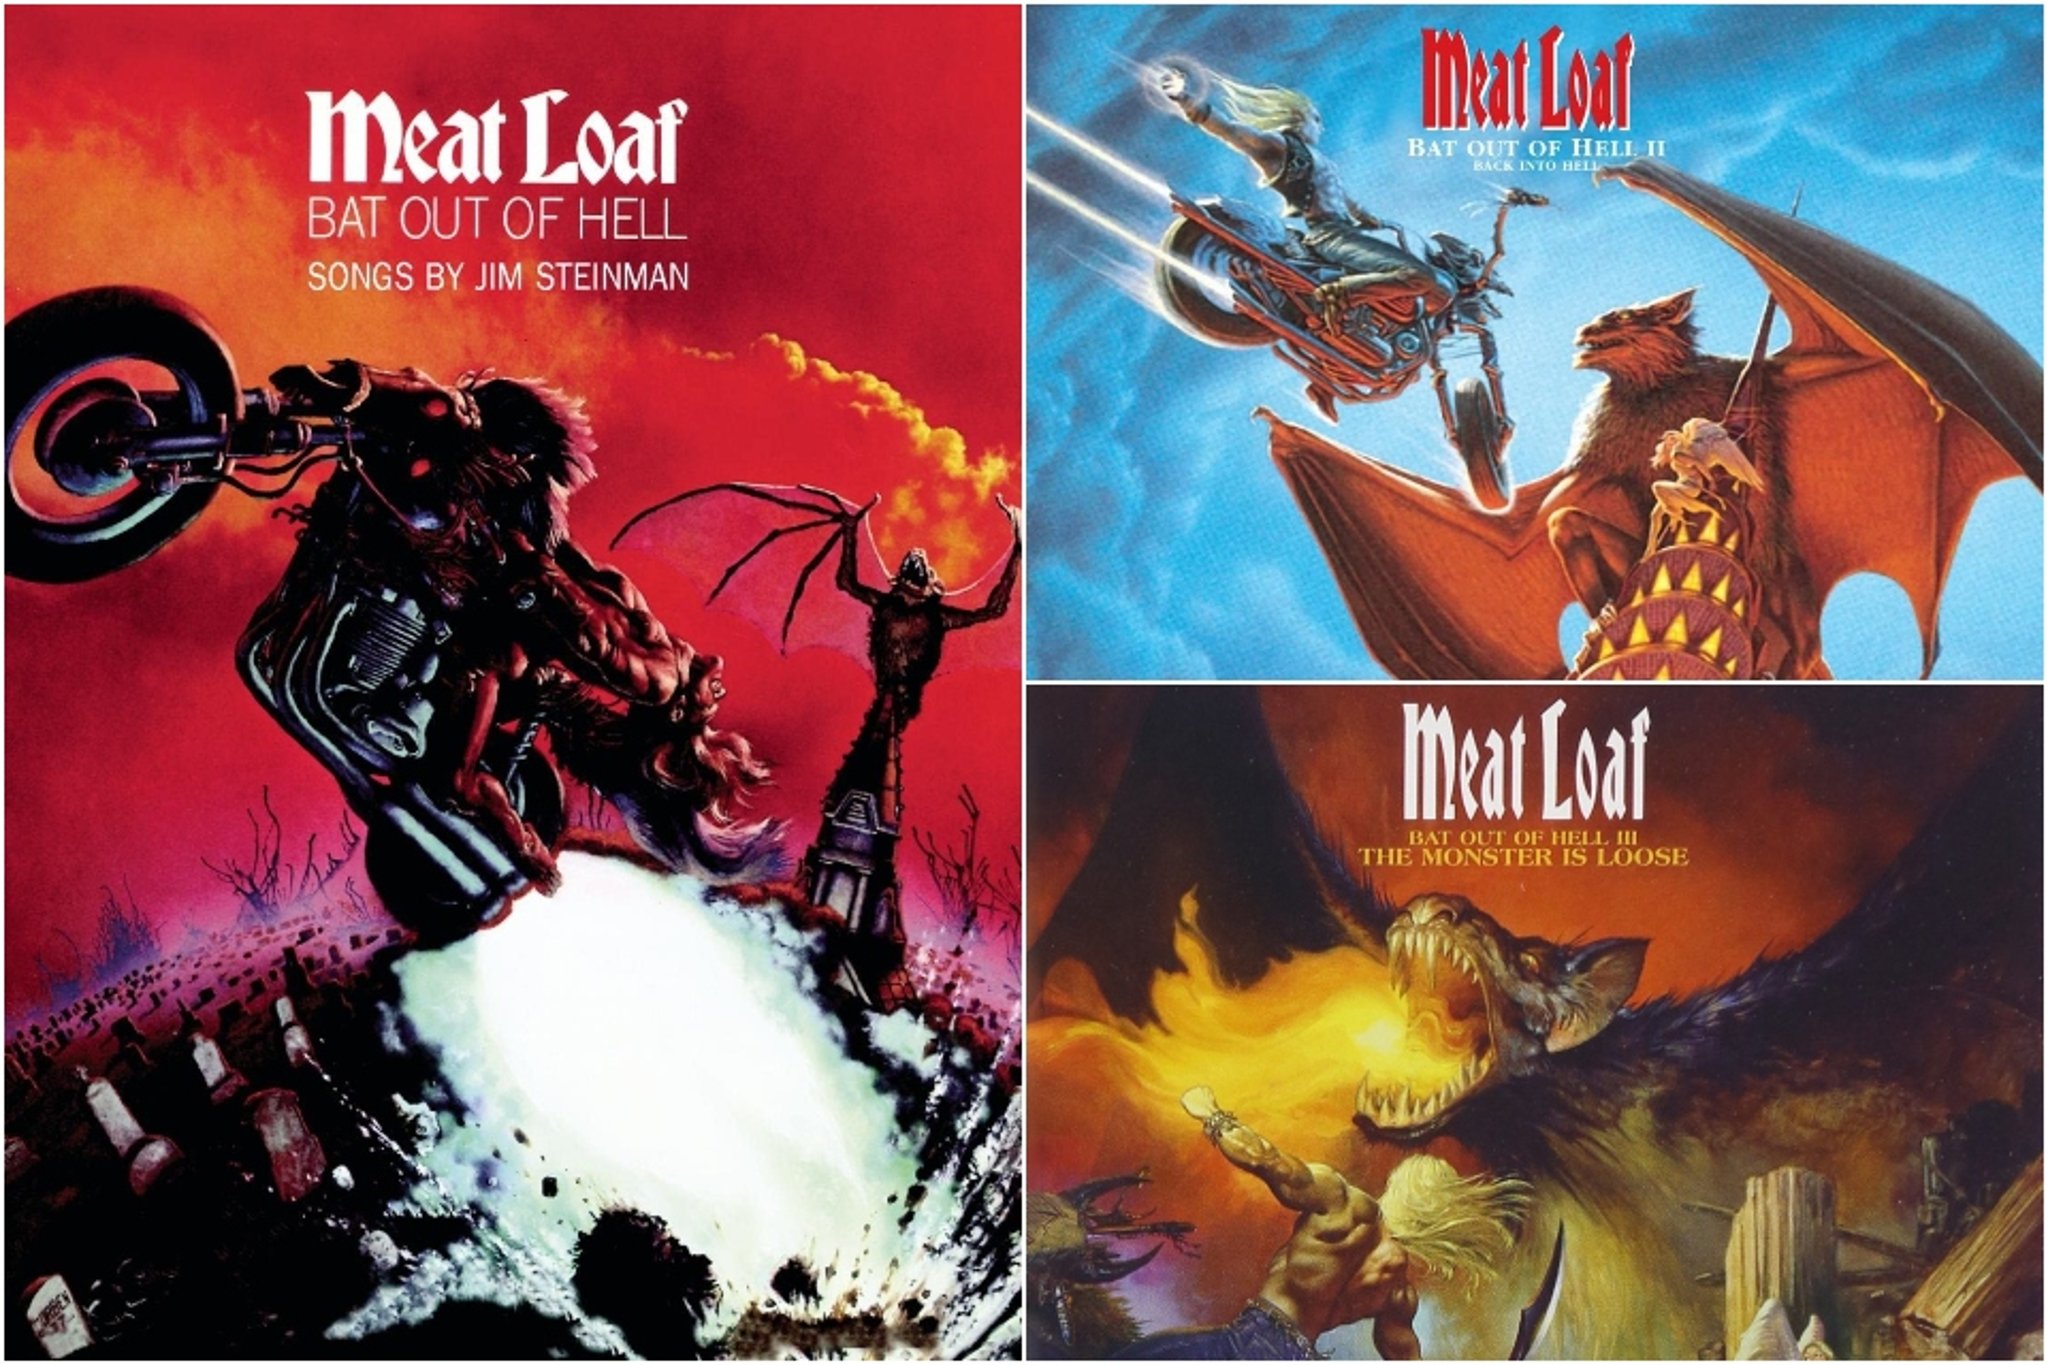 What Are The Lyrics To Meat Loaf S Hit Song Bat Out Of Hell When Was It Released Nationalworld